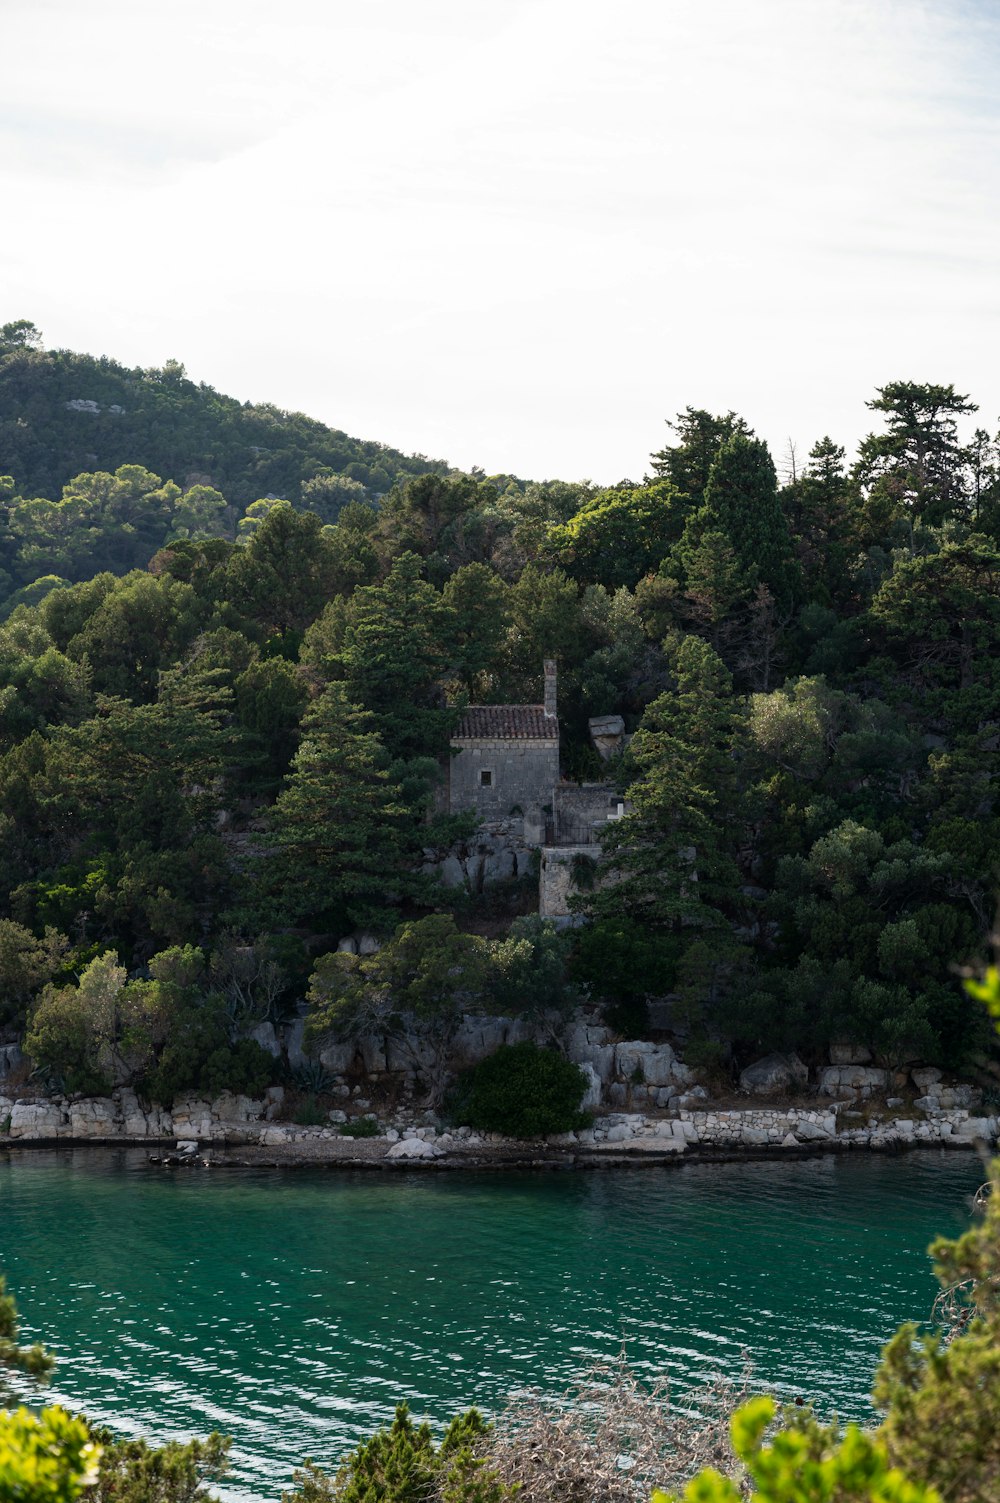 a house on a hill overlooking a body of water